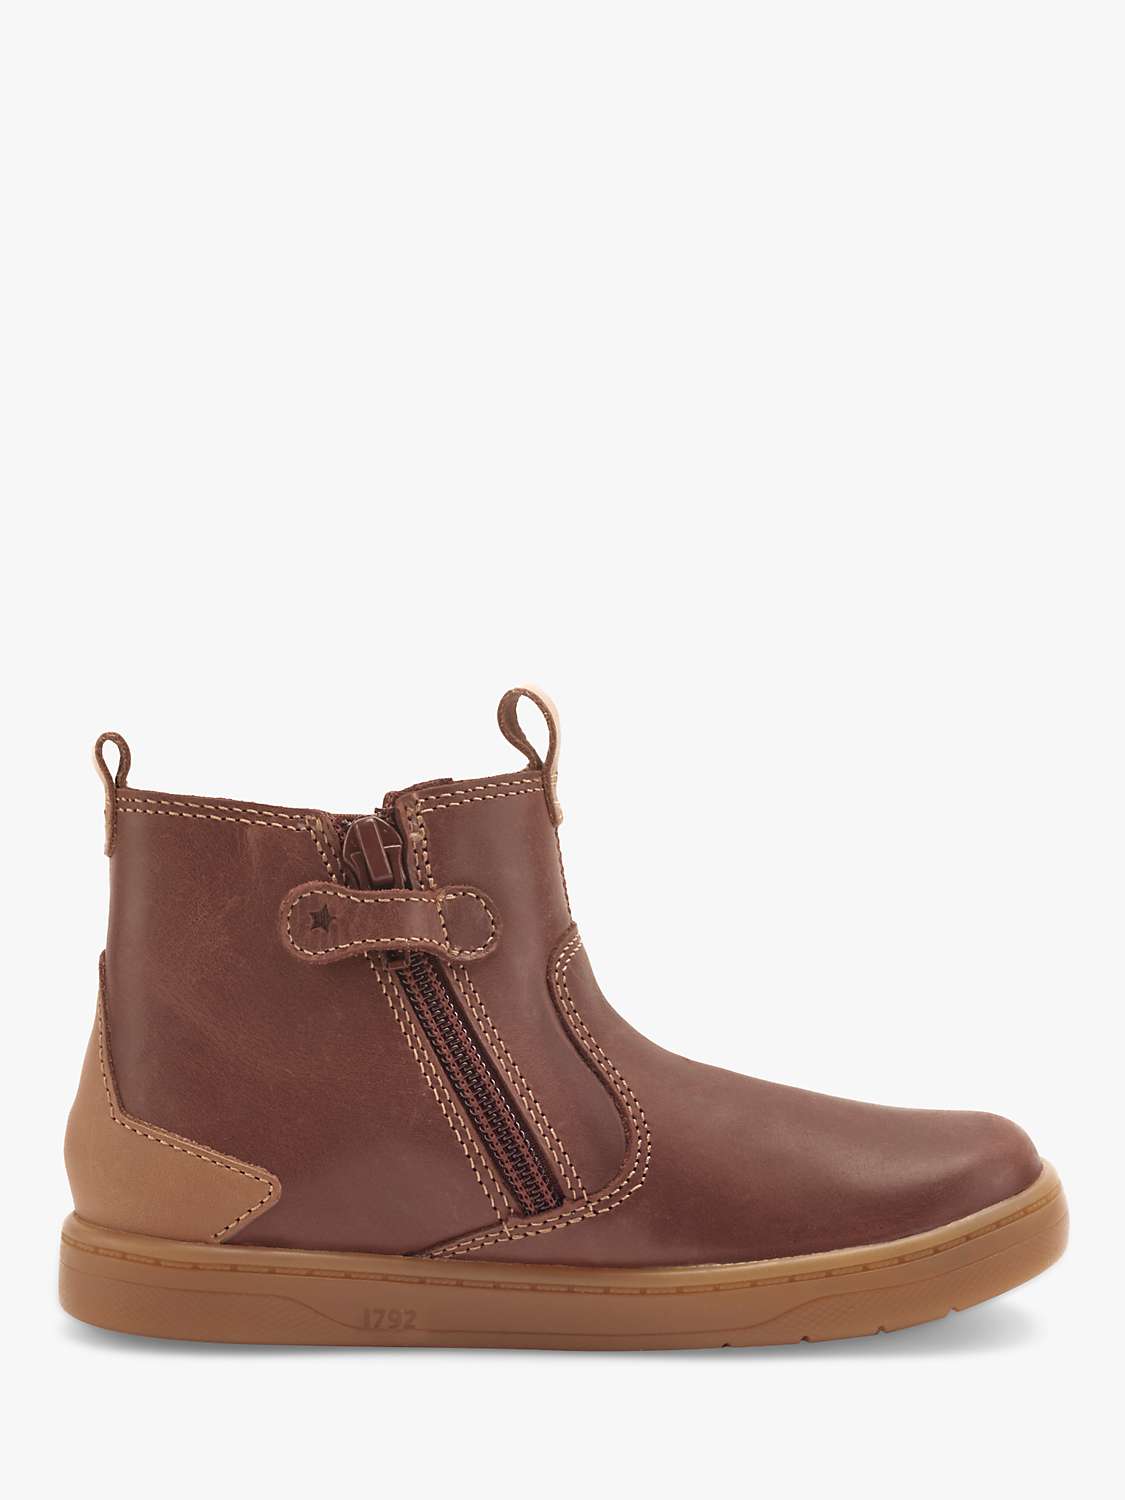 Buy Start-Rite Kid's Energy Ankle Boots, Tan Online at johnlewis.com